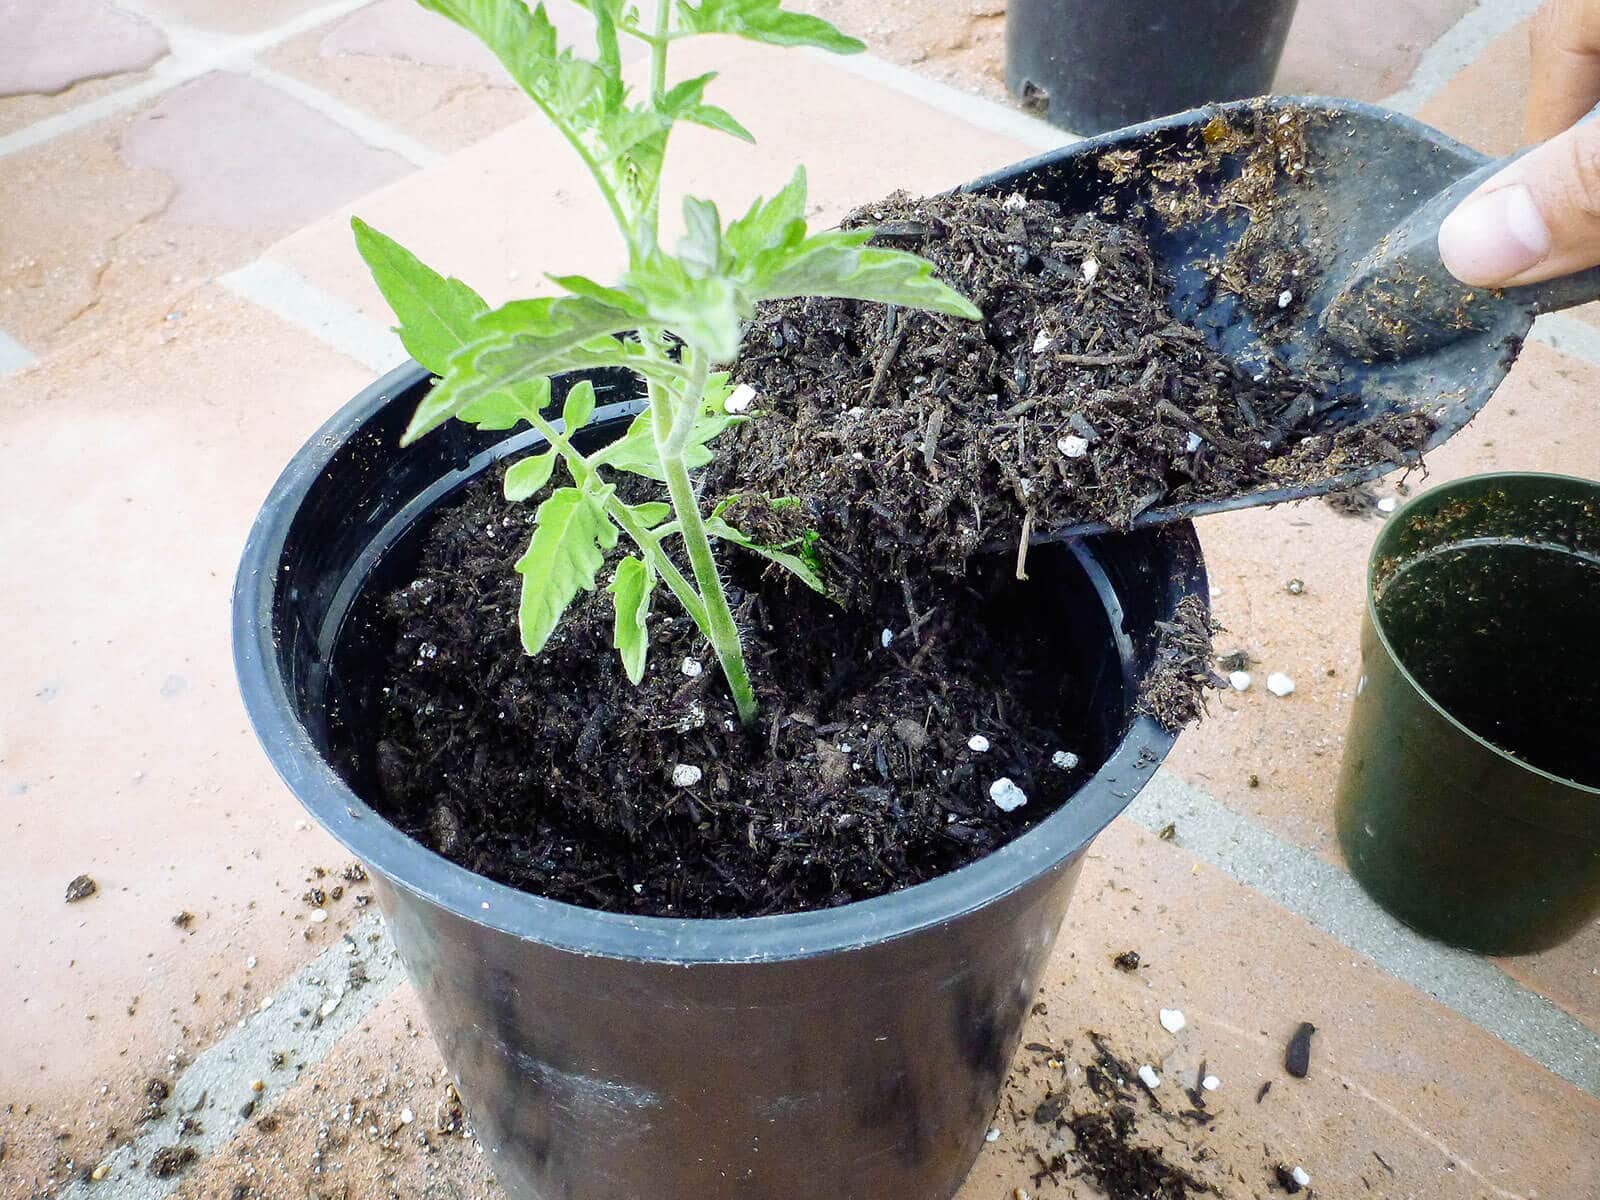 Fill the pot with high-quality potting soil